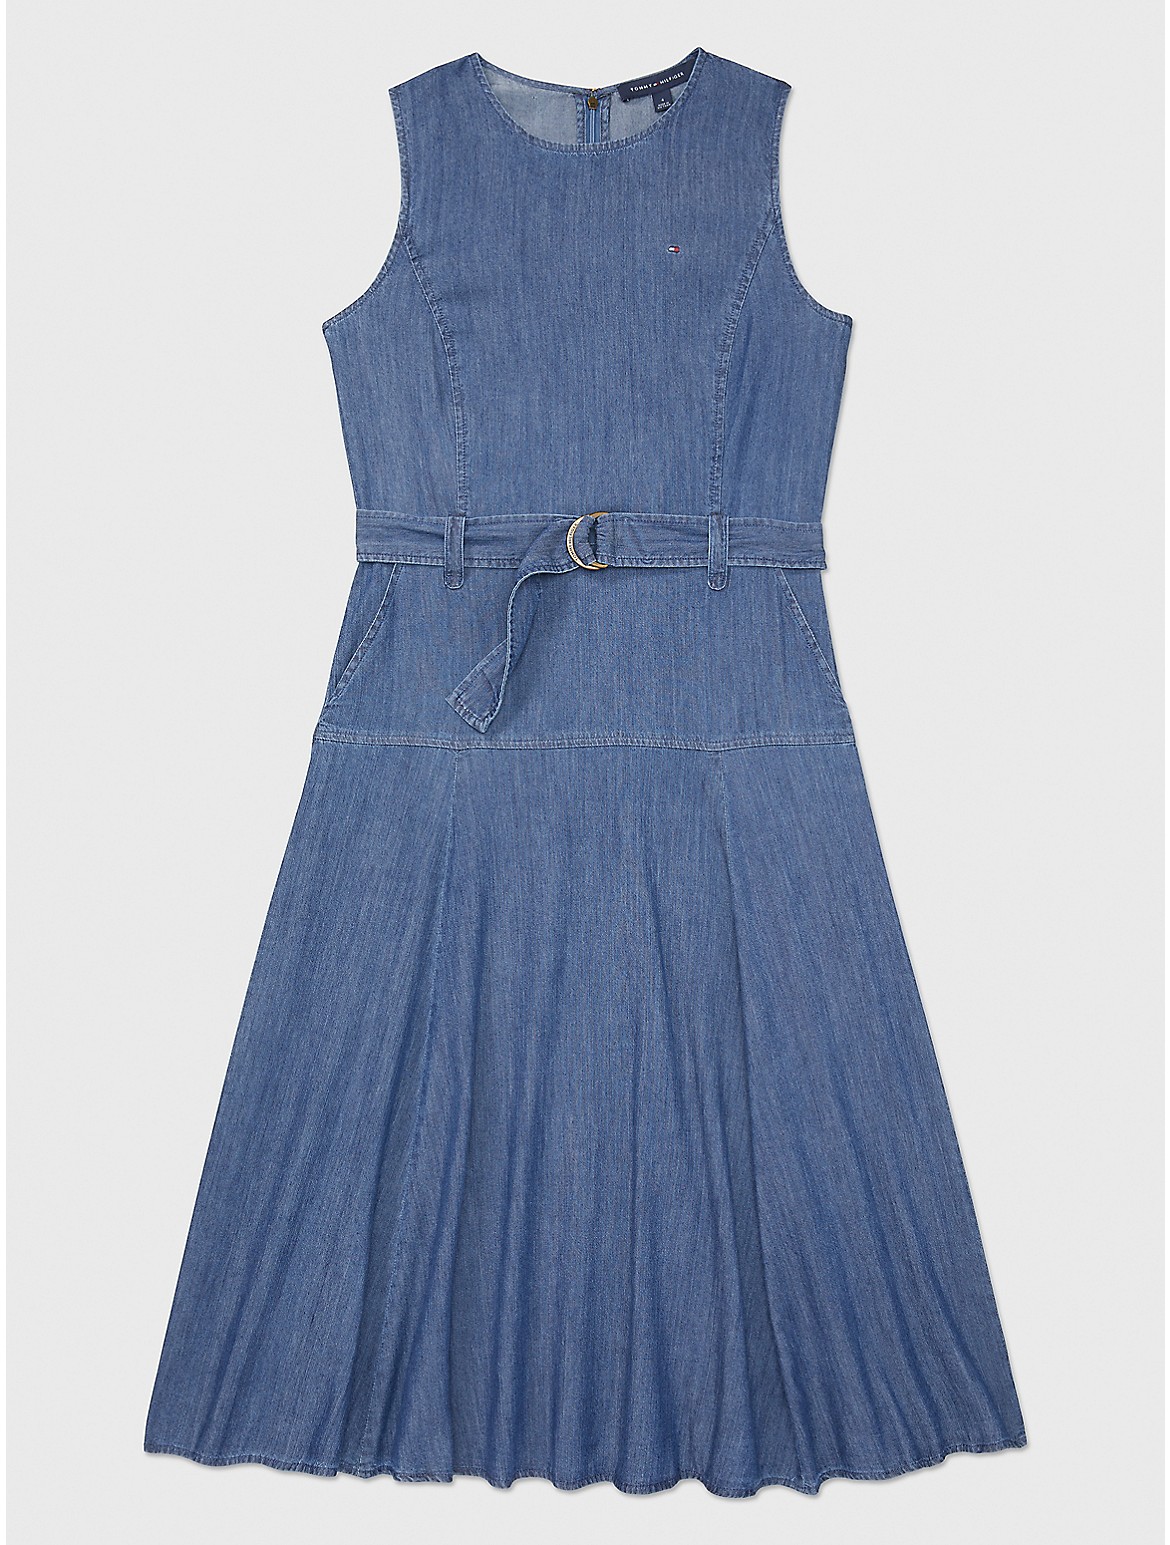 Tommy Hilfiger Women's Belted Chambray Dress - Blue - 4